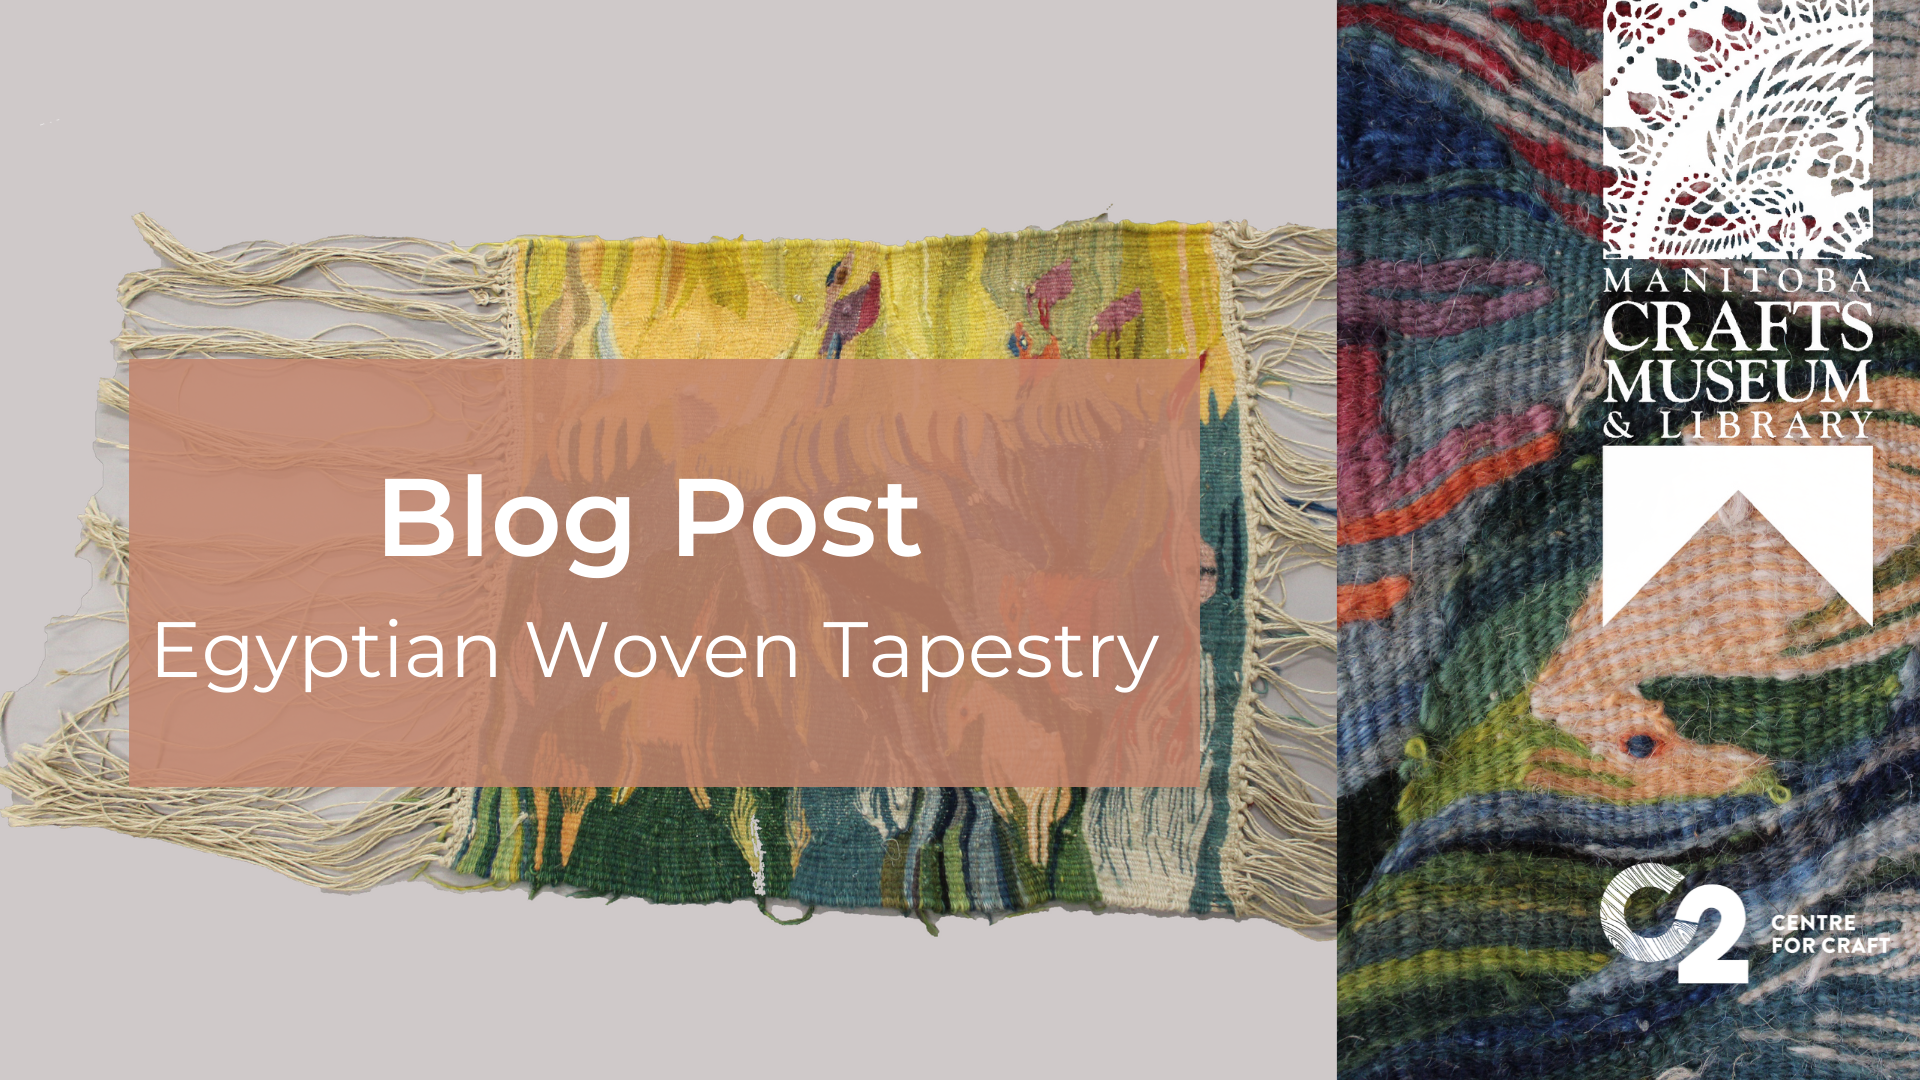 https://c2centreforcraft.ca/wp-content/uploads/2022/01/Blog-Post-Egyptian-Woven-Tapestry.png